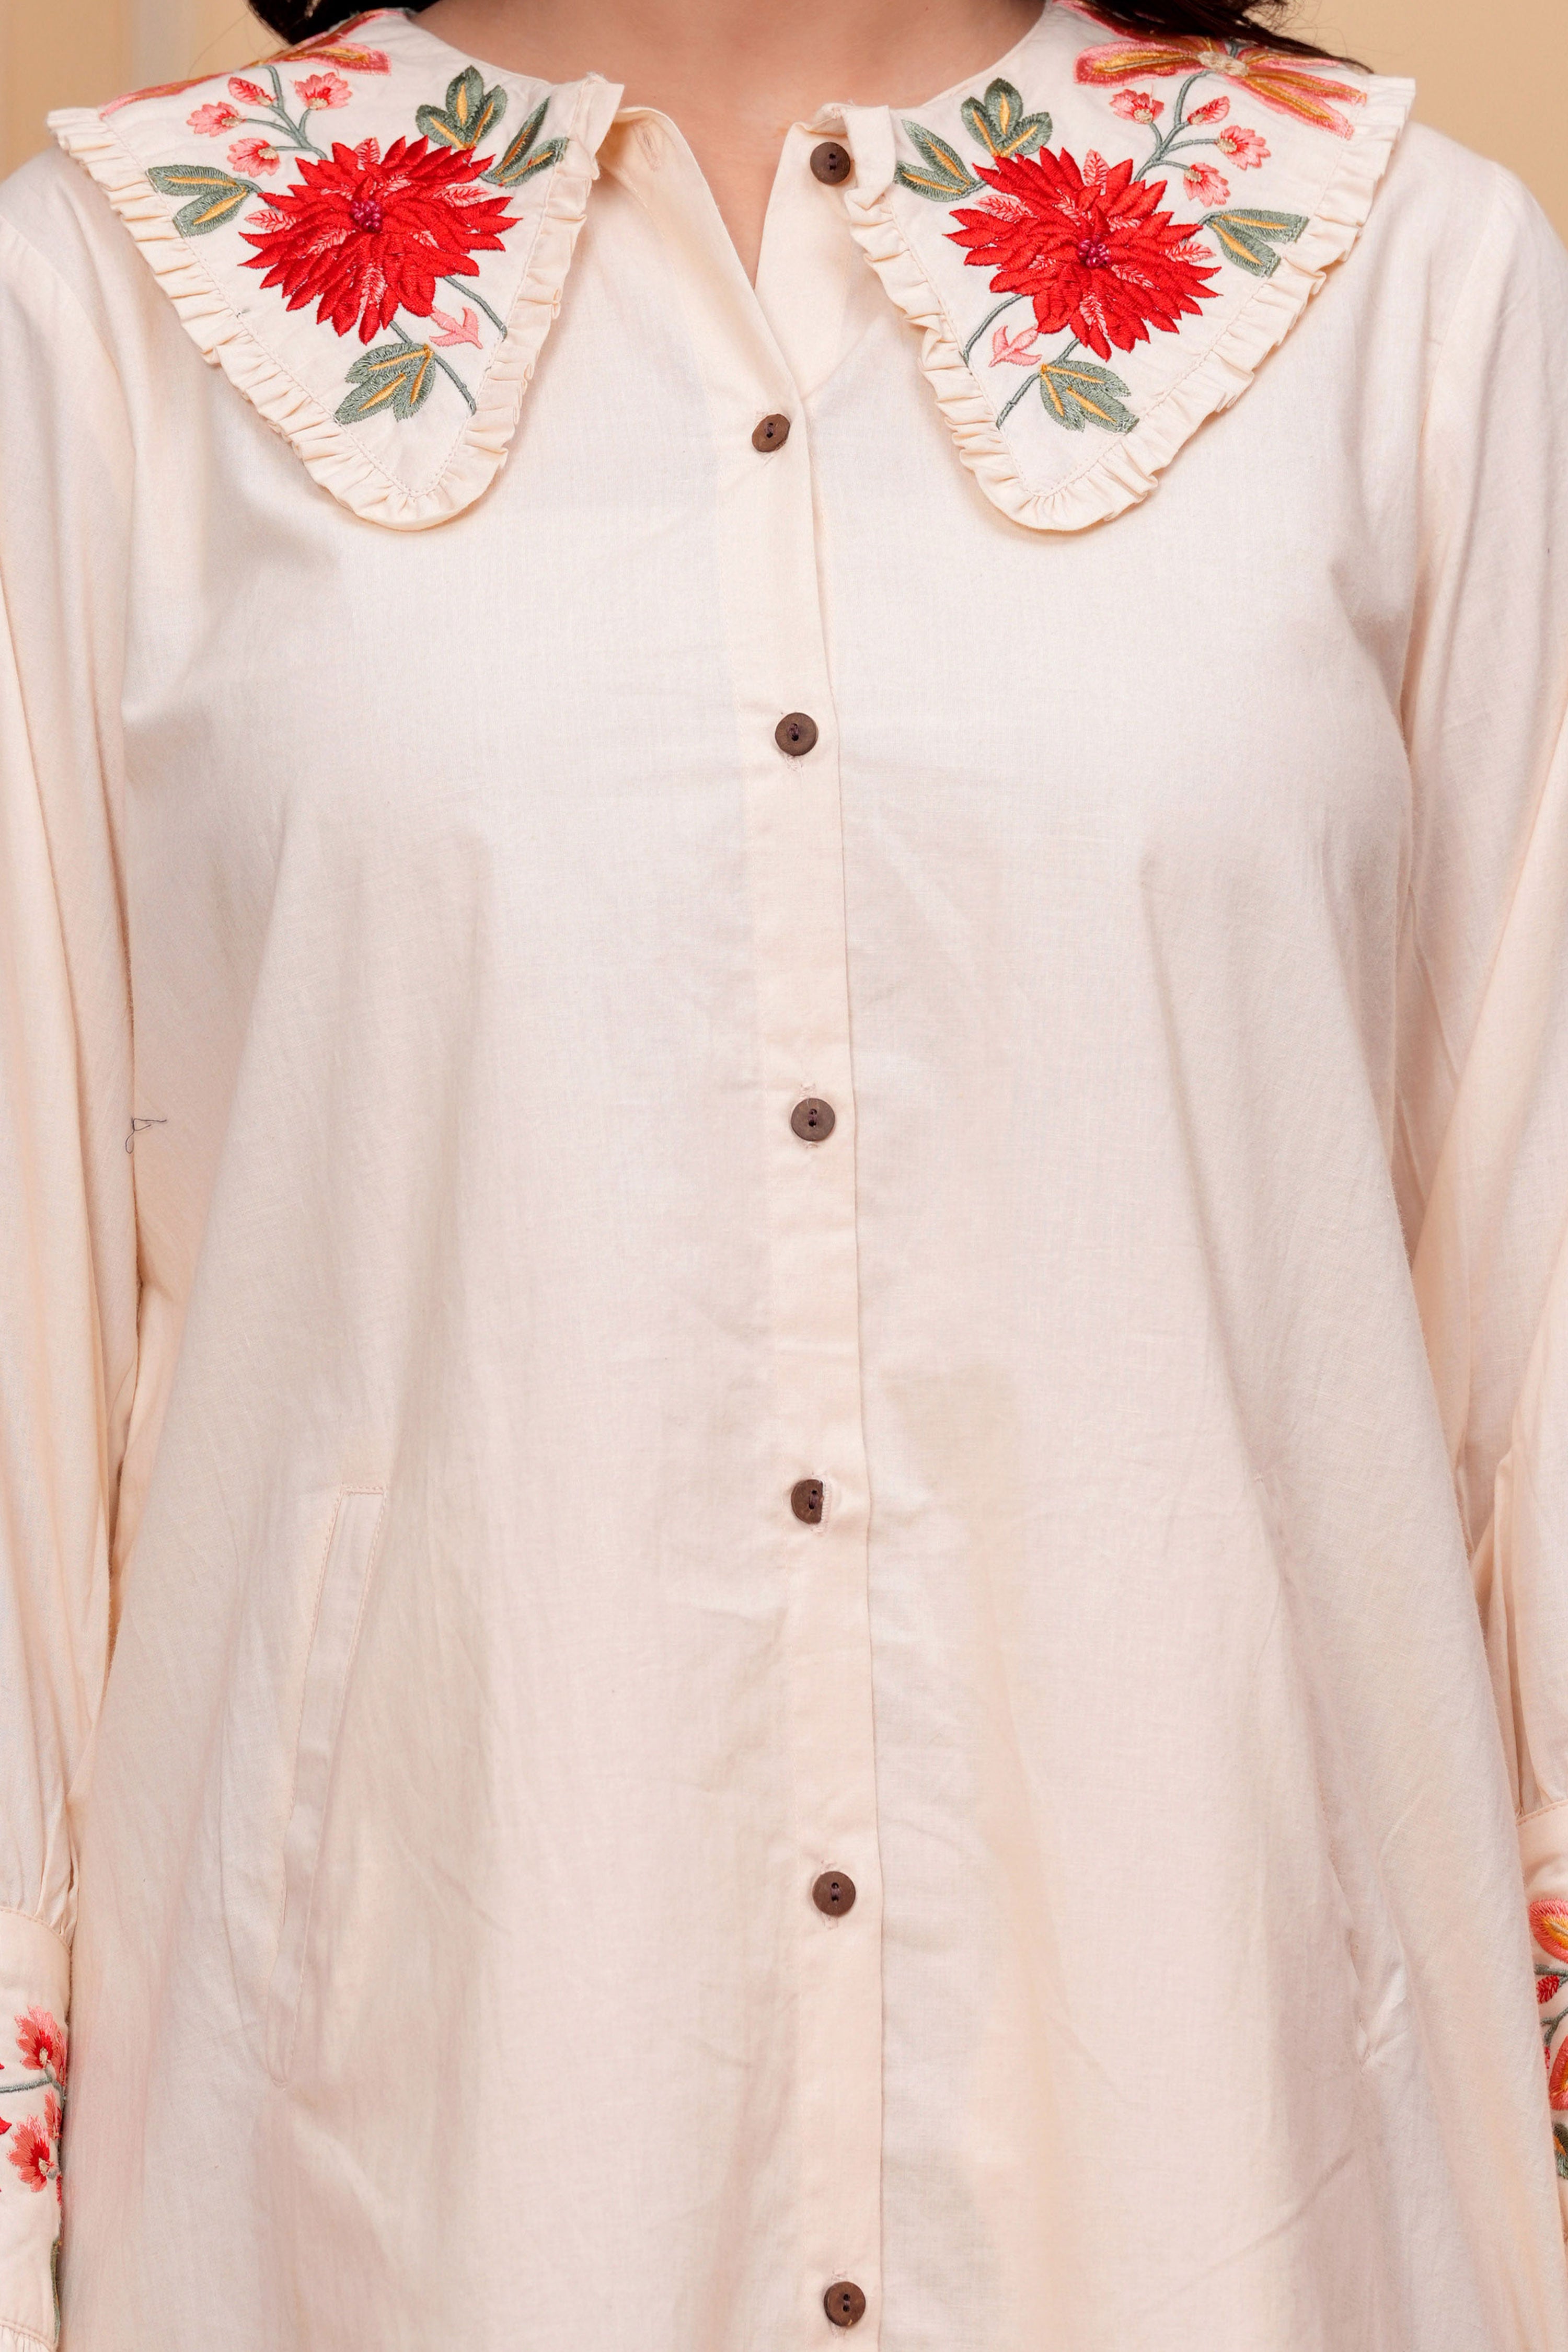 White Floral Embroidered Collar Cotton Dress